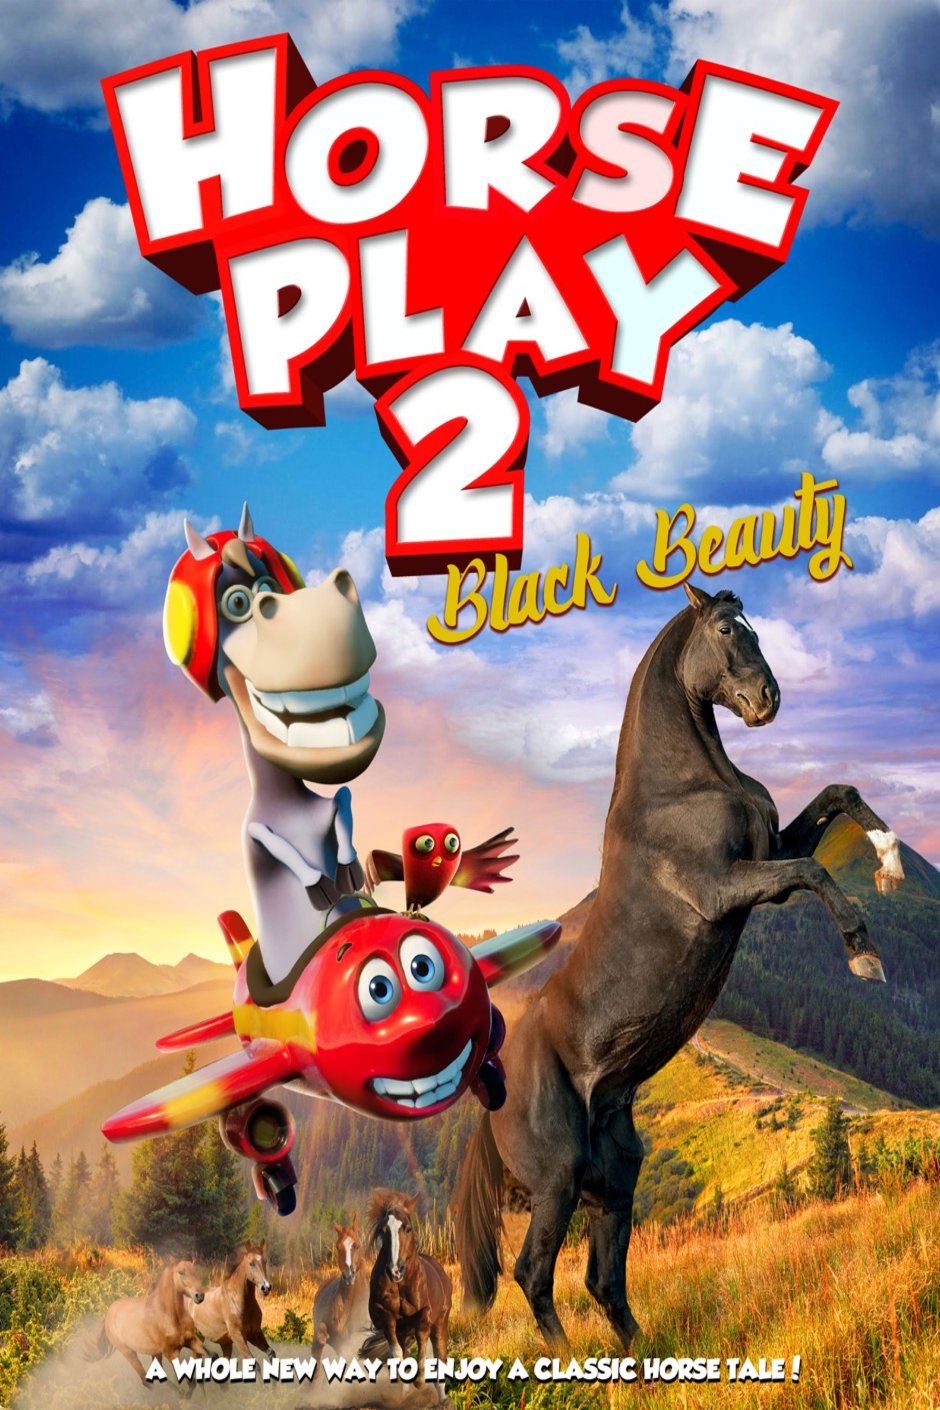 Poster of the movie Horse Play 2: Black Beauty